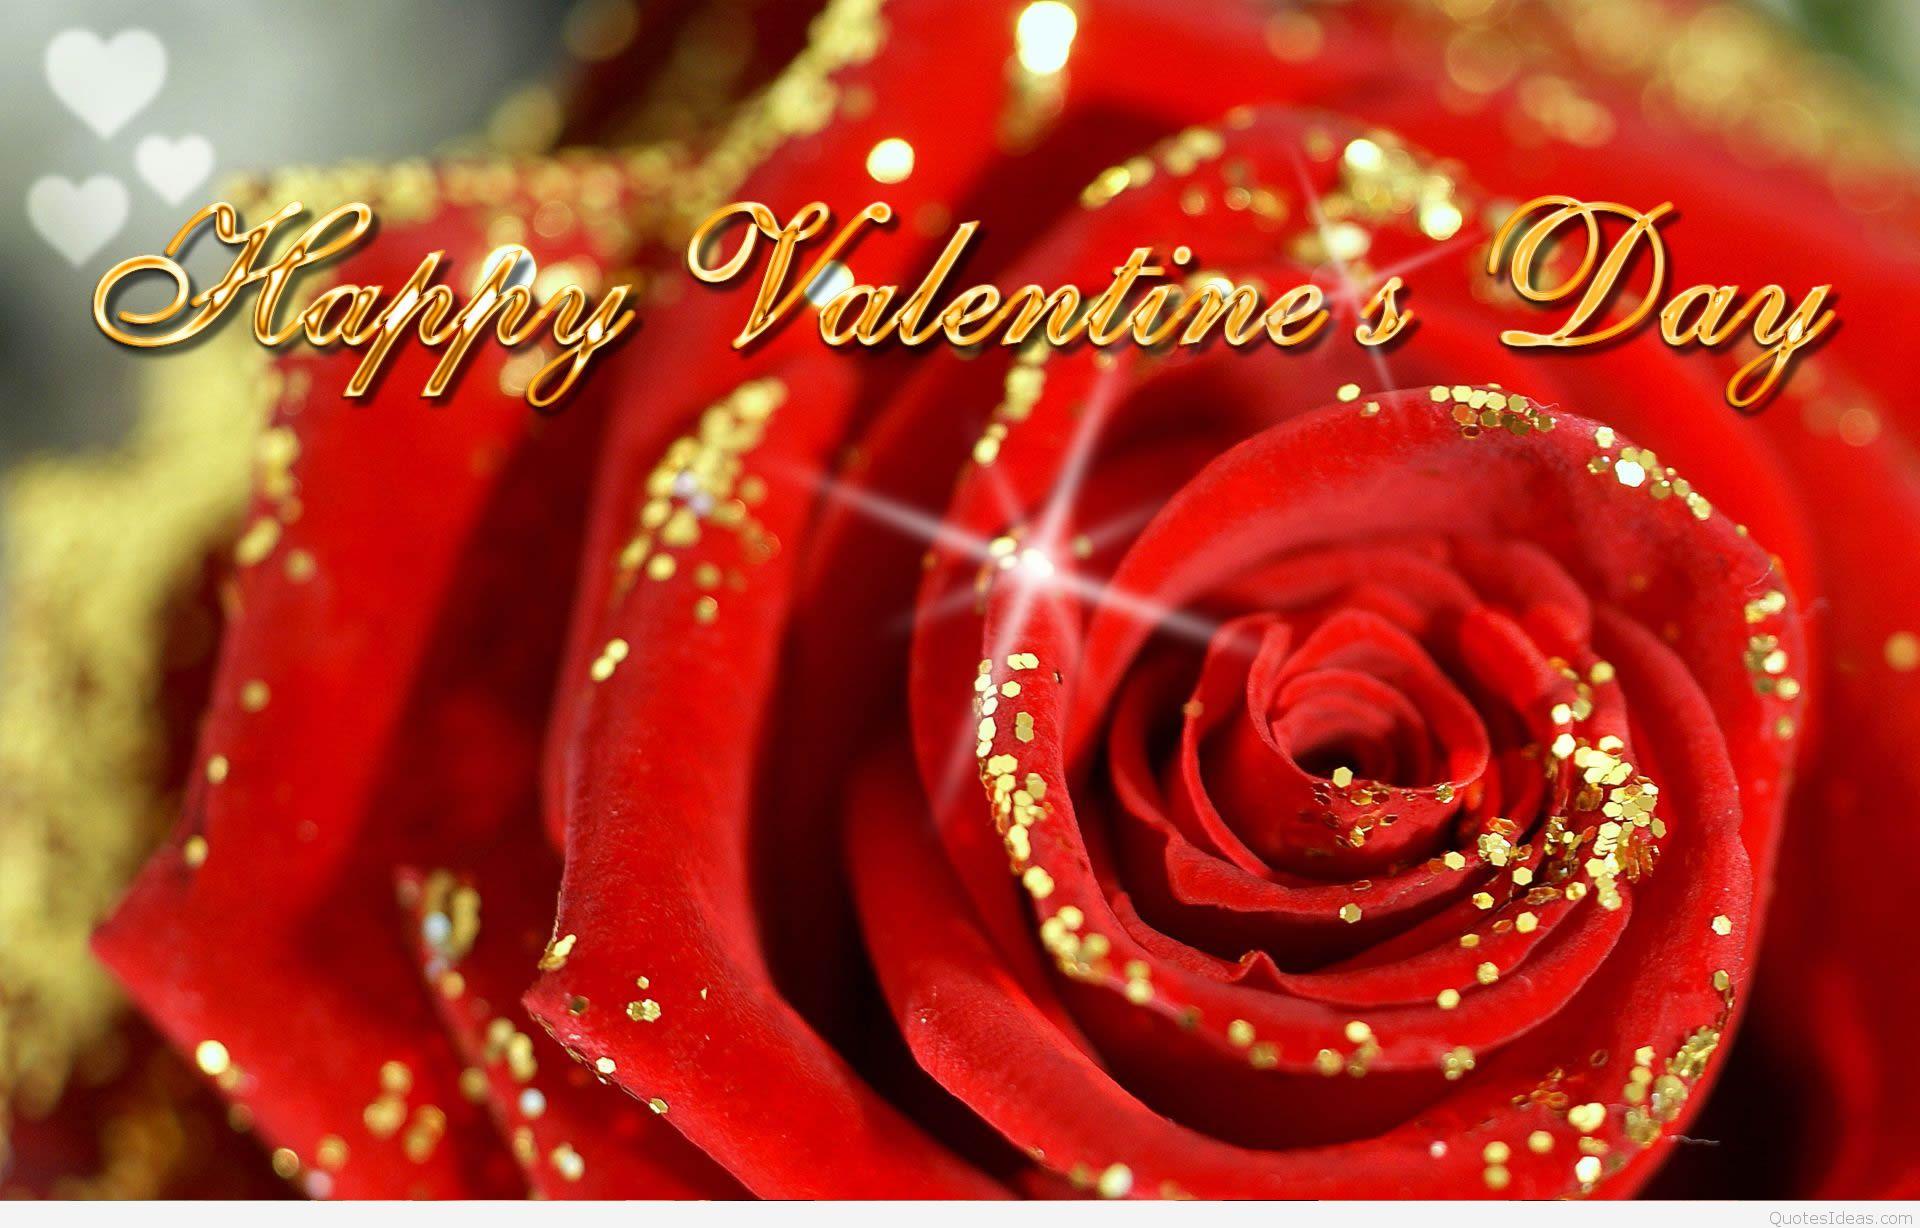 Happy Valentine's day roses, sayings, image and background